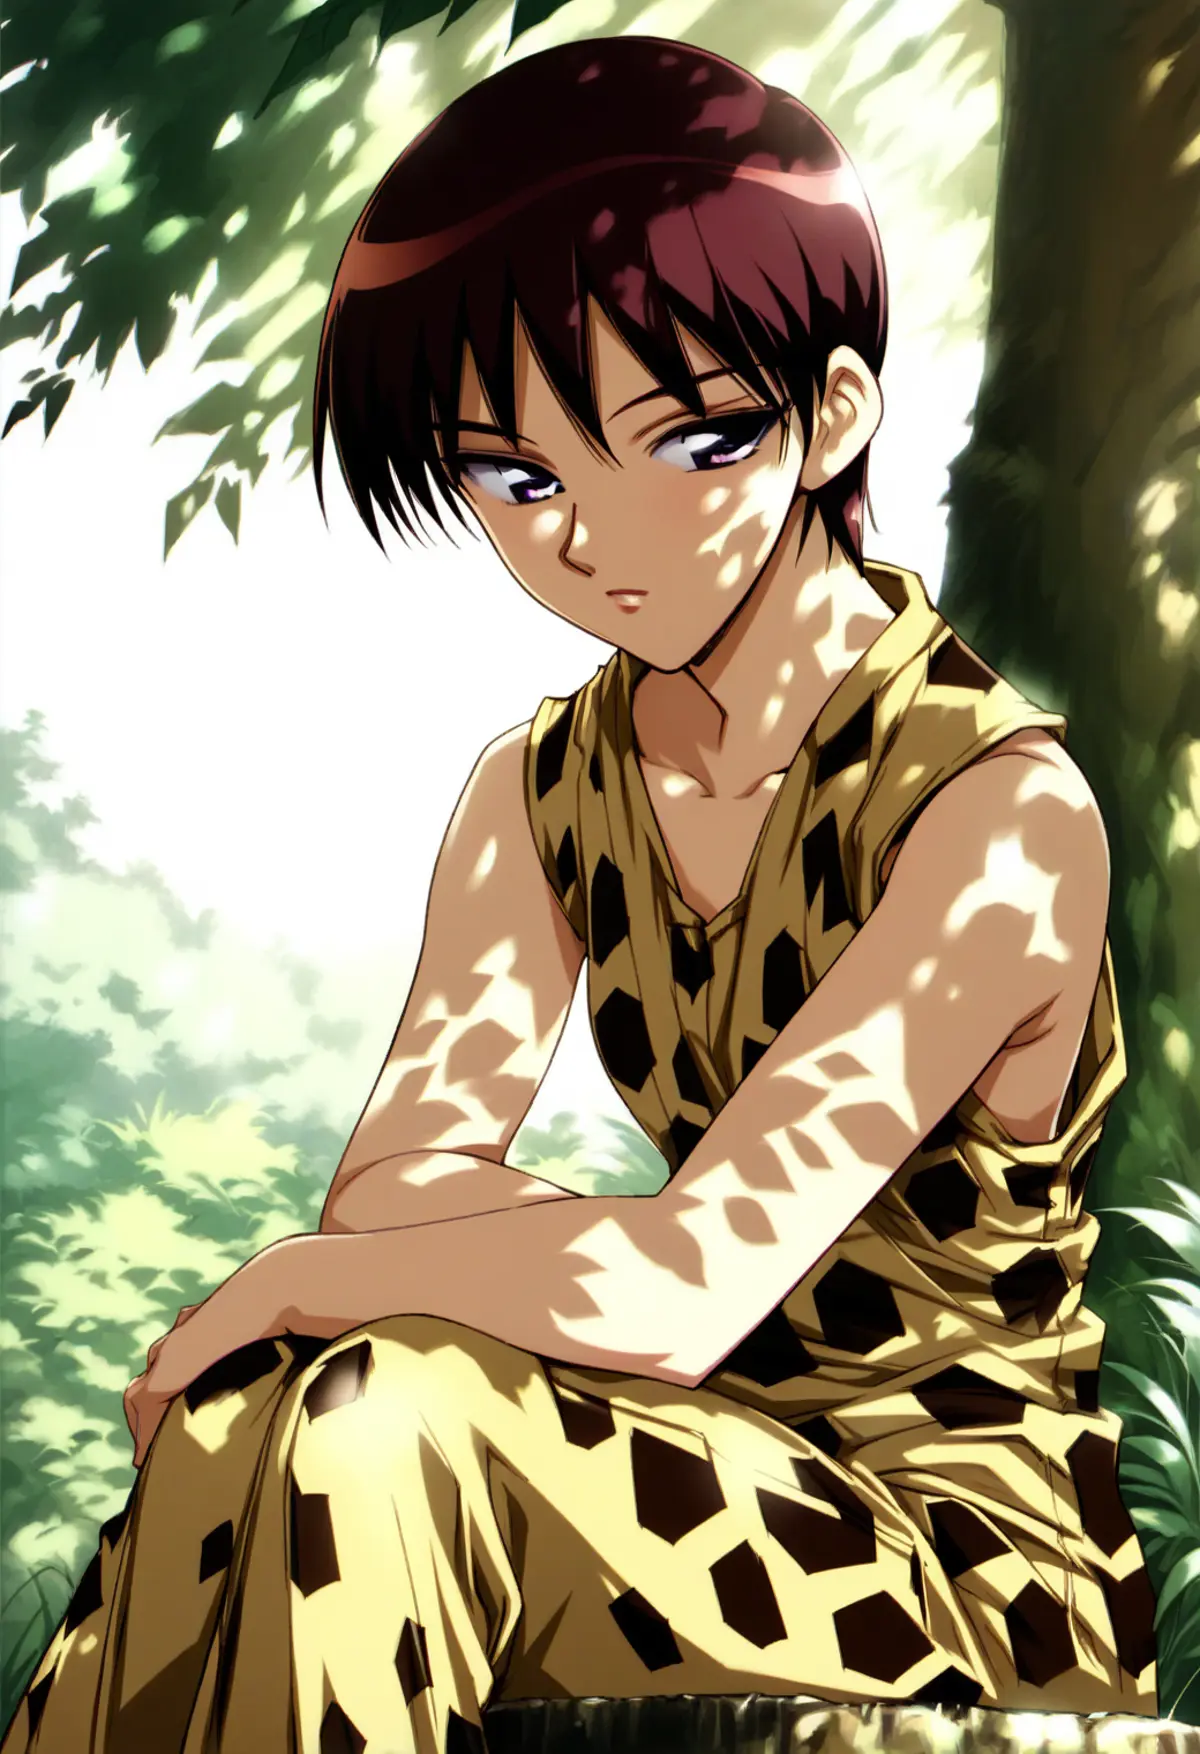 A young woman with short dark hair, sitting in a tranquil forest setting. She is dressed in a sleeveless dress and is positioned with her hands resting on the knees. Dappled sunlight filters through the canopy of green leaves above, casting patterned shadows across the scene and the character. The character gazes off to the side with a neutral expression, suggesting a moment of introspection or quiet contemplation. 